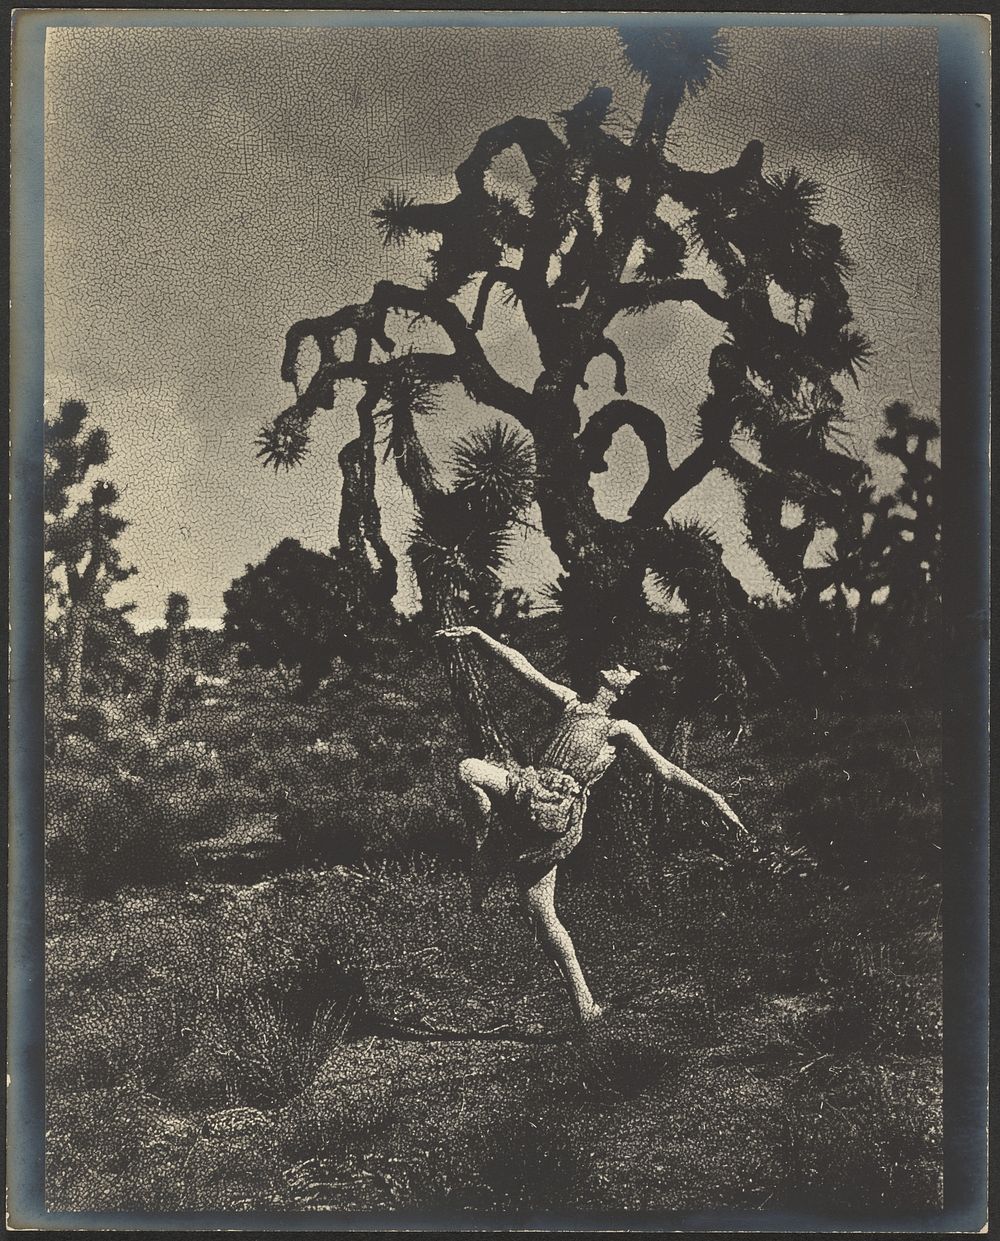 Inspiration of the Dance by Louis Fleckenstein